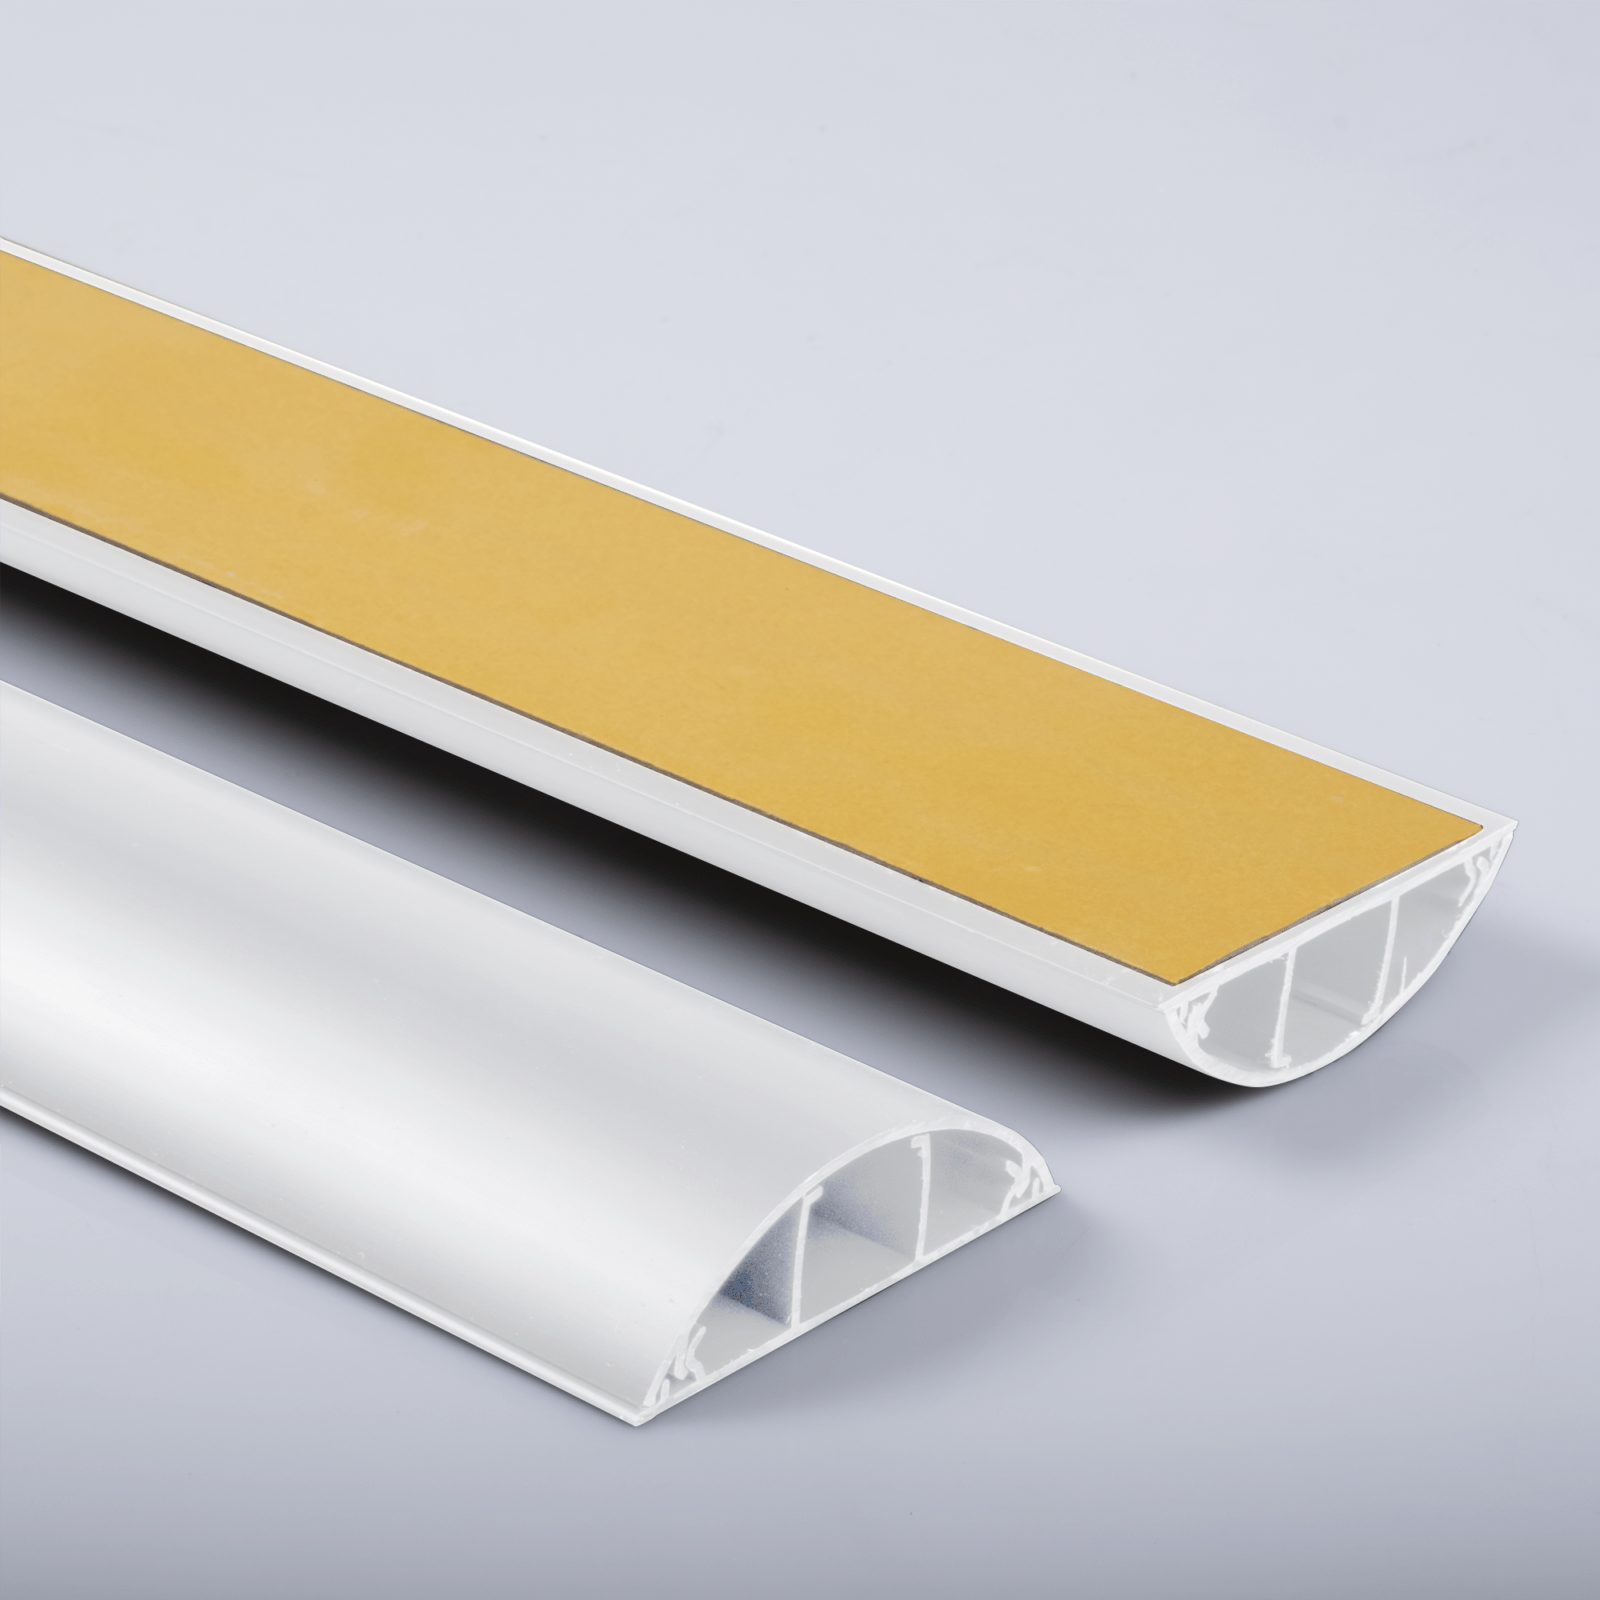 https://aplusplastic.com/wp-content/uploads/2019/03/Floor-Type-Cable-Trunking-white.png